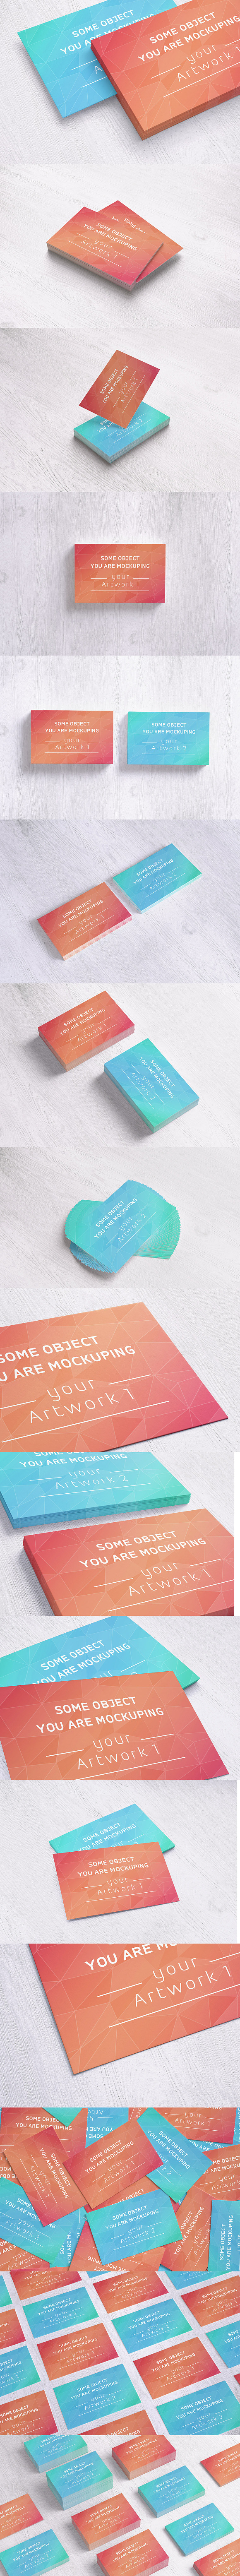 UK Business Cards Mock-up's Pack in Print Mockups - product preview 2